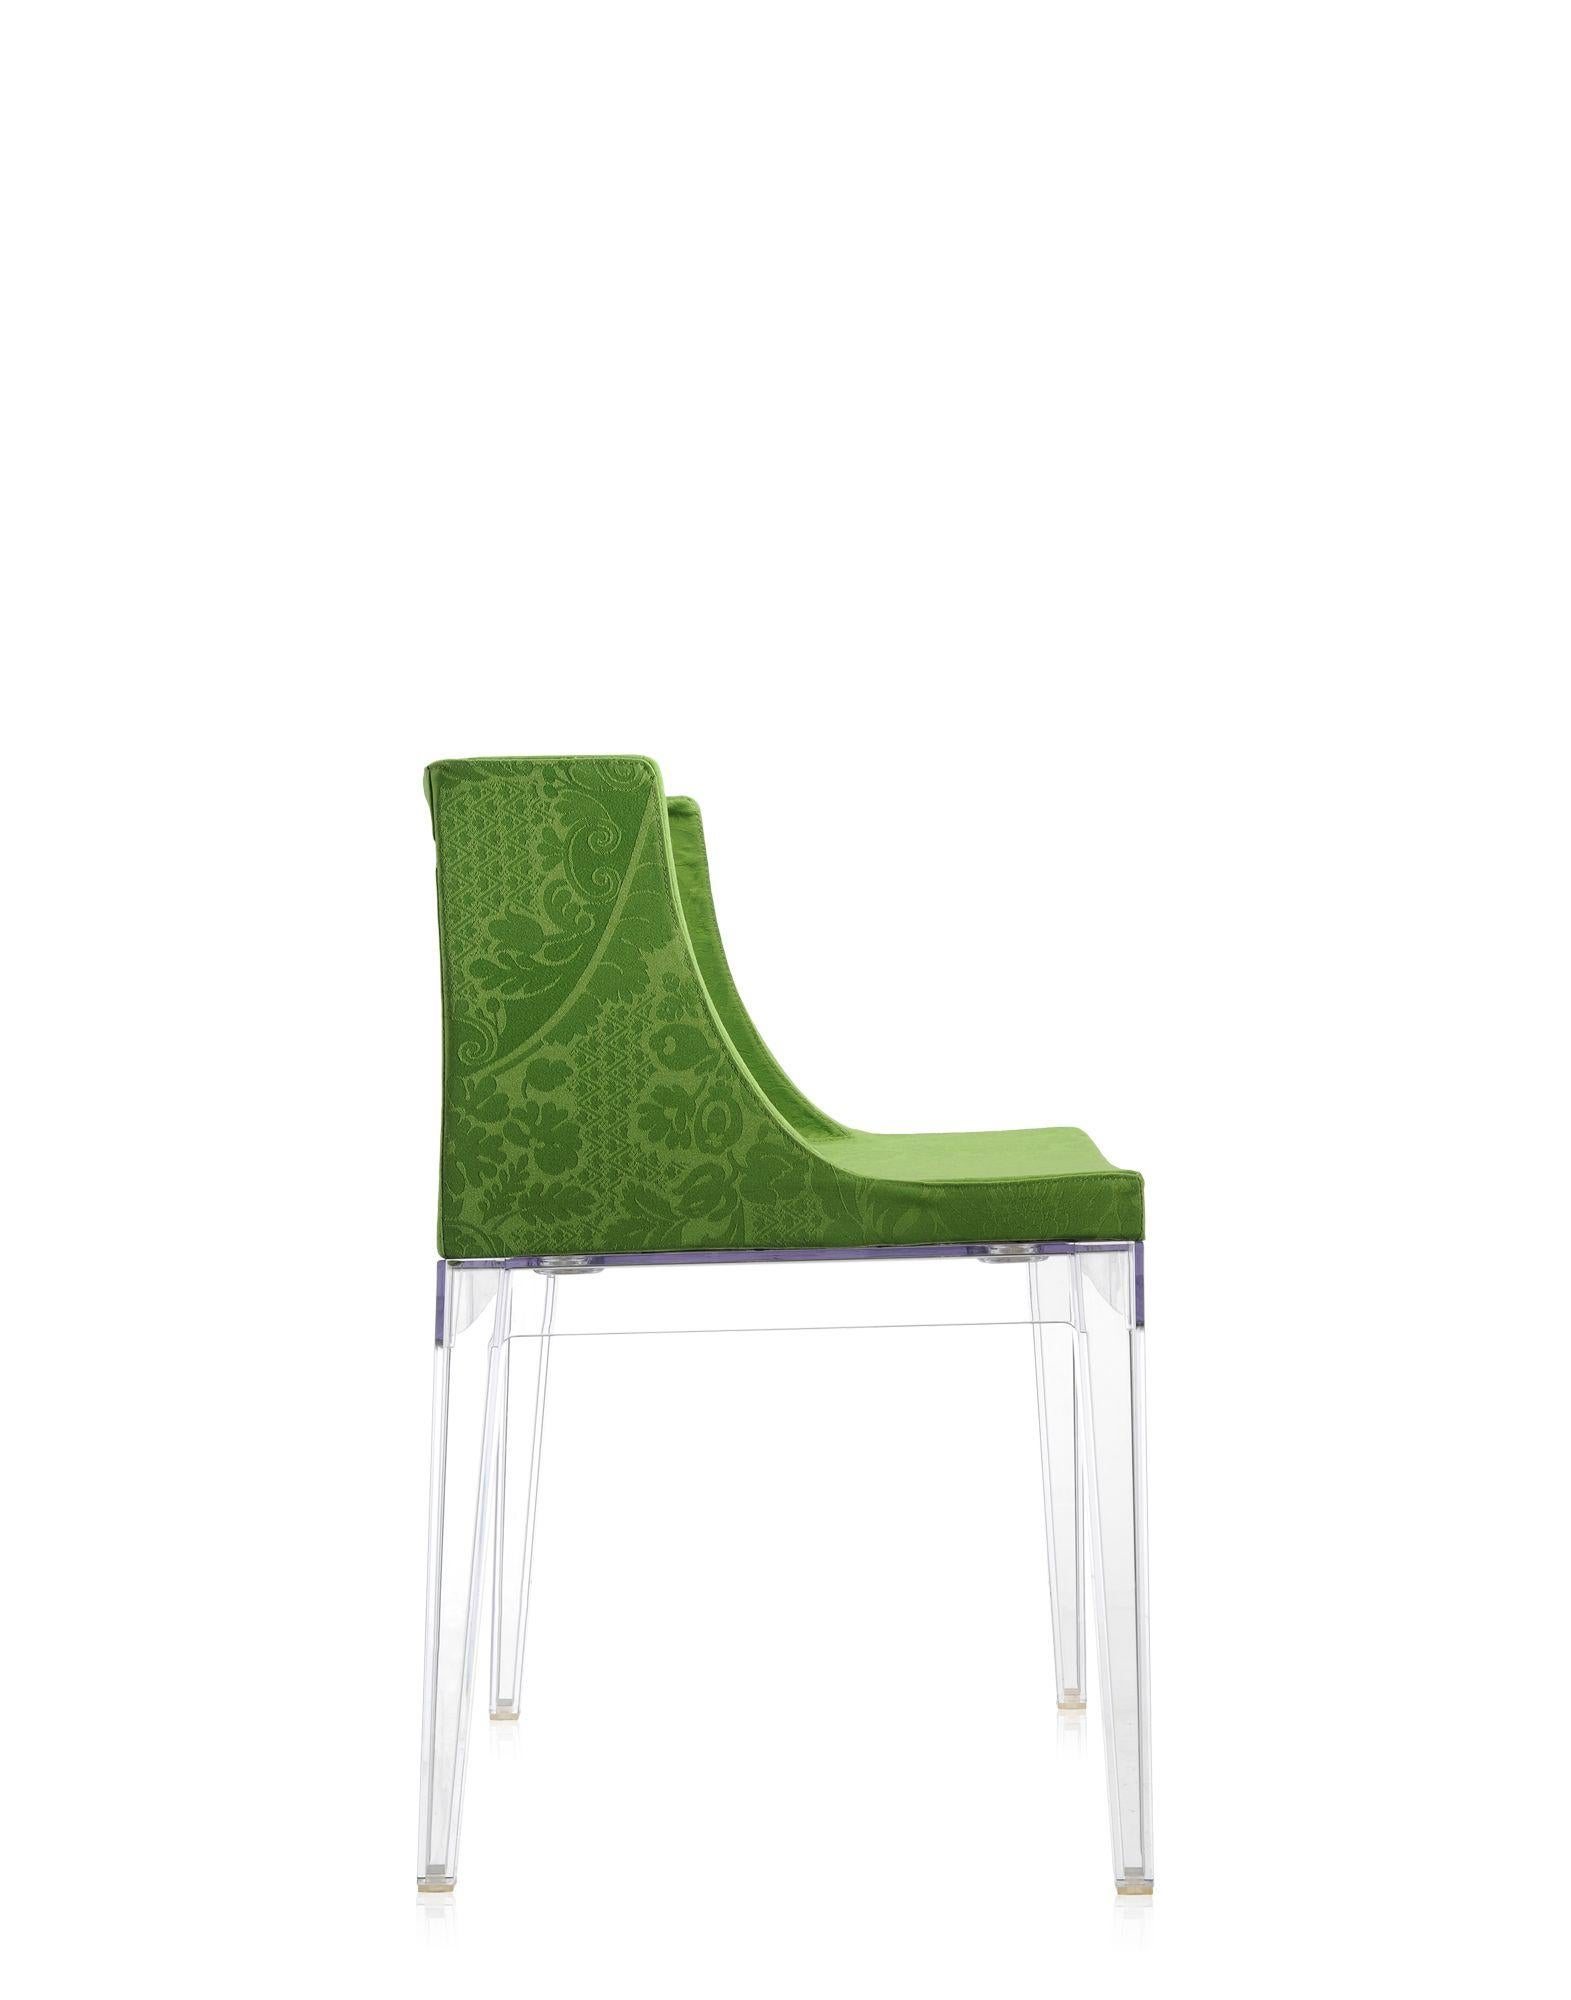 Italian Kartell Mademoiselle Chair by Philippe Starck in Green Damask For Sale